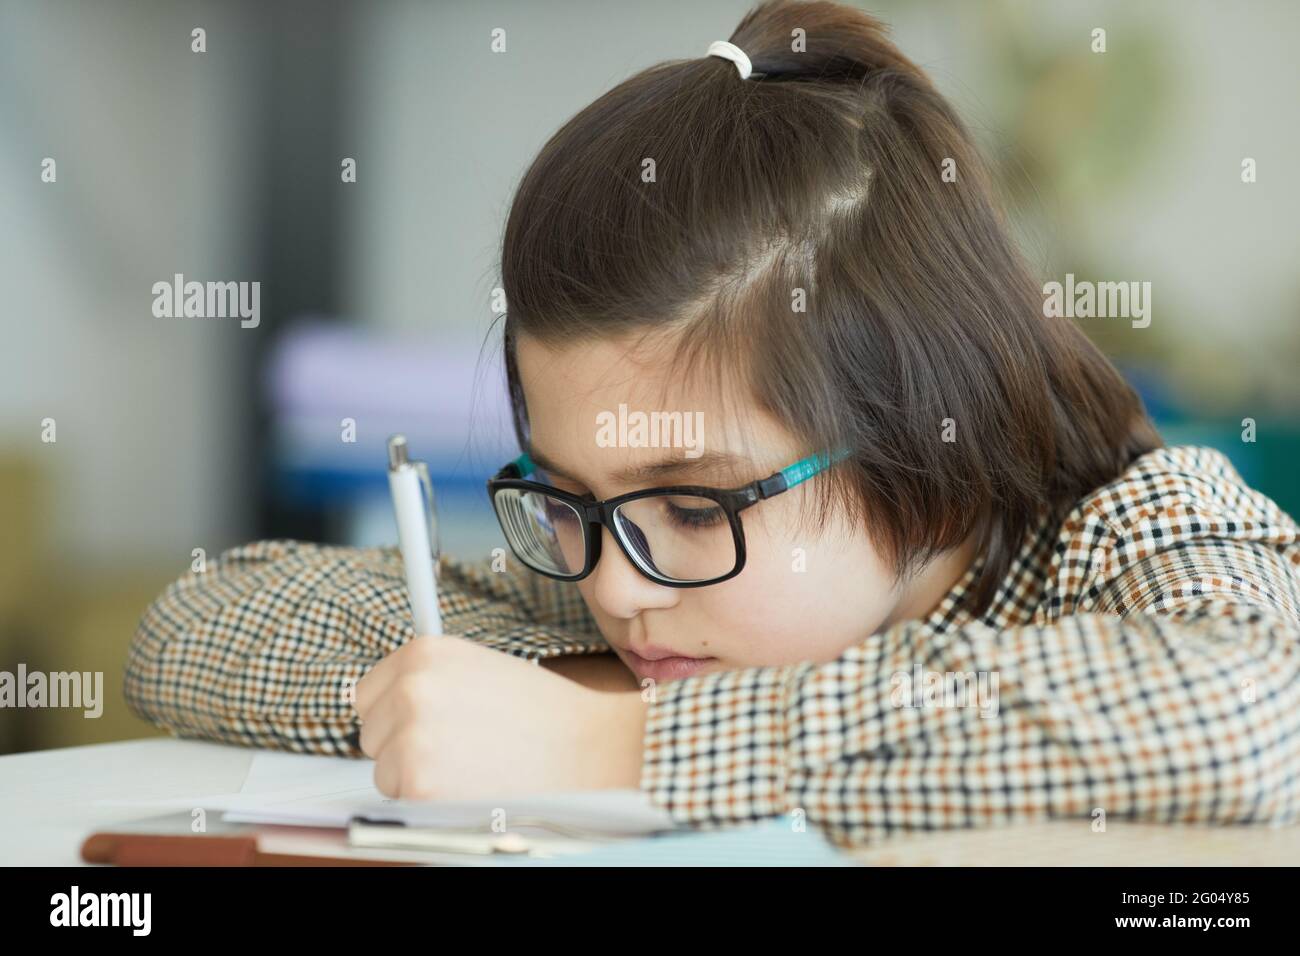 Close up portrait of cute boy wearing glasses sitting at desk in school classroom and writing Stock Photo